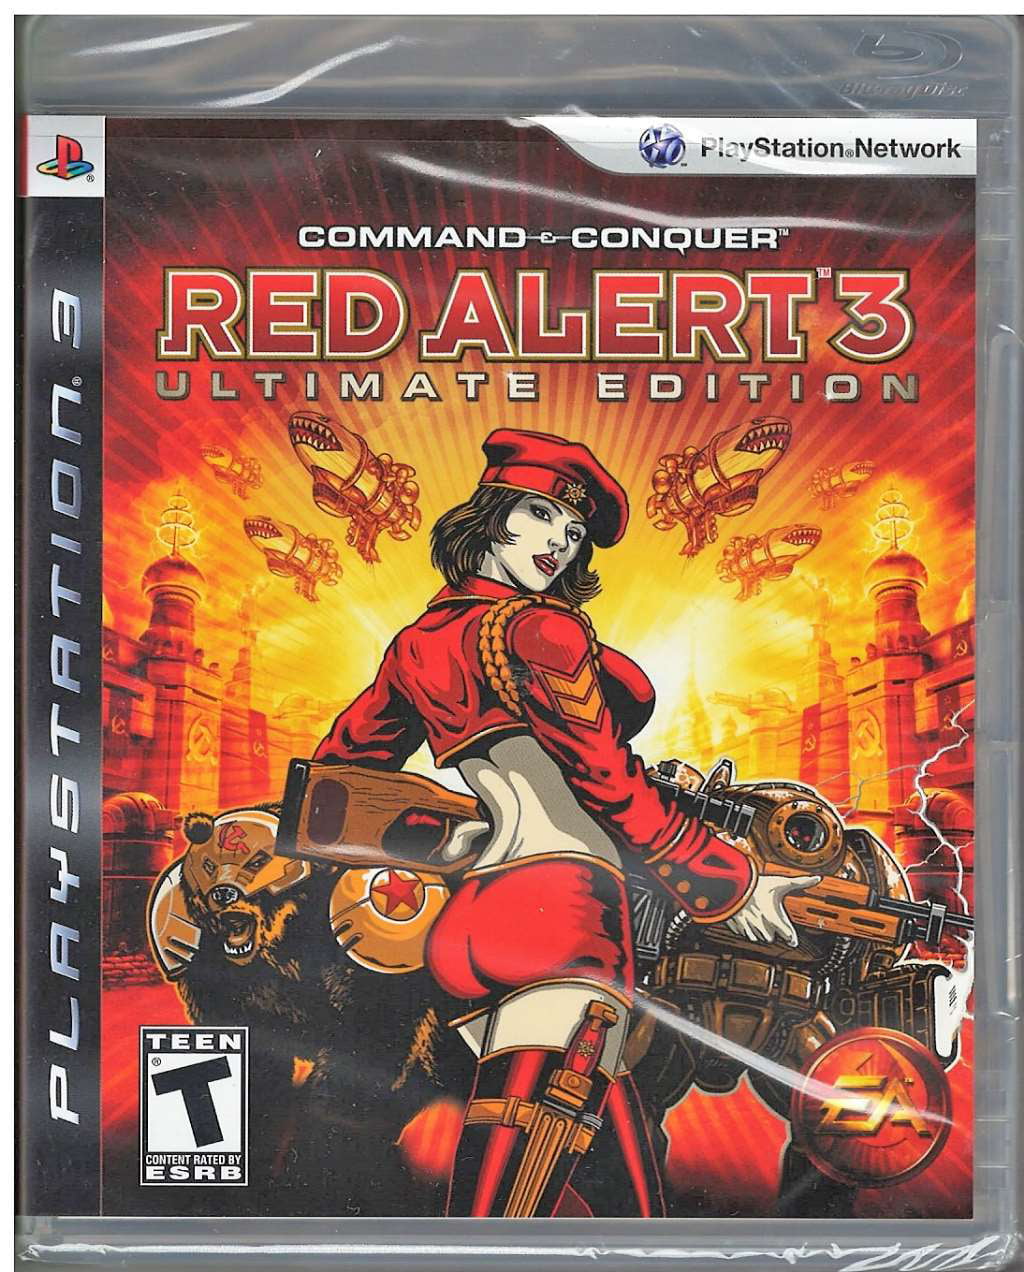 Command & Conquer: Red Alert 2. Command & Conquer: Red Alert 3. Command & Conquer обложка. Red alert ps3